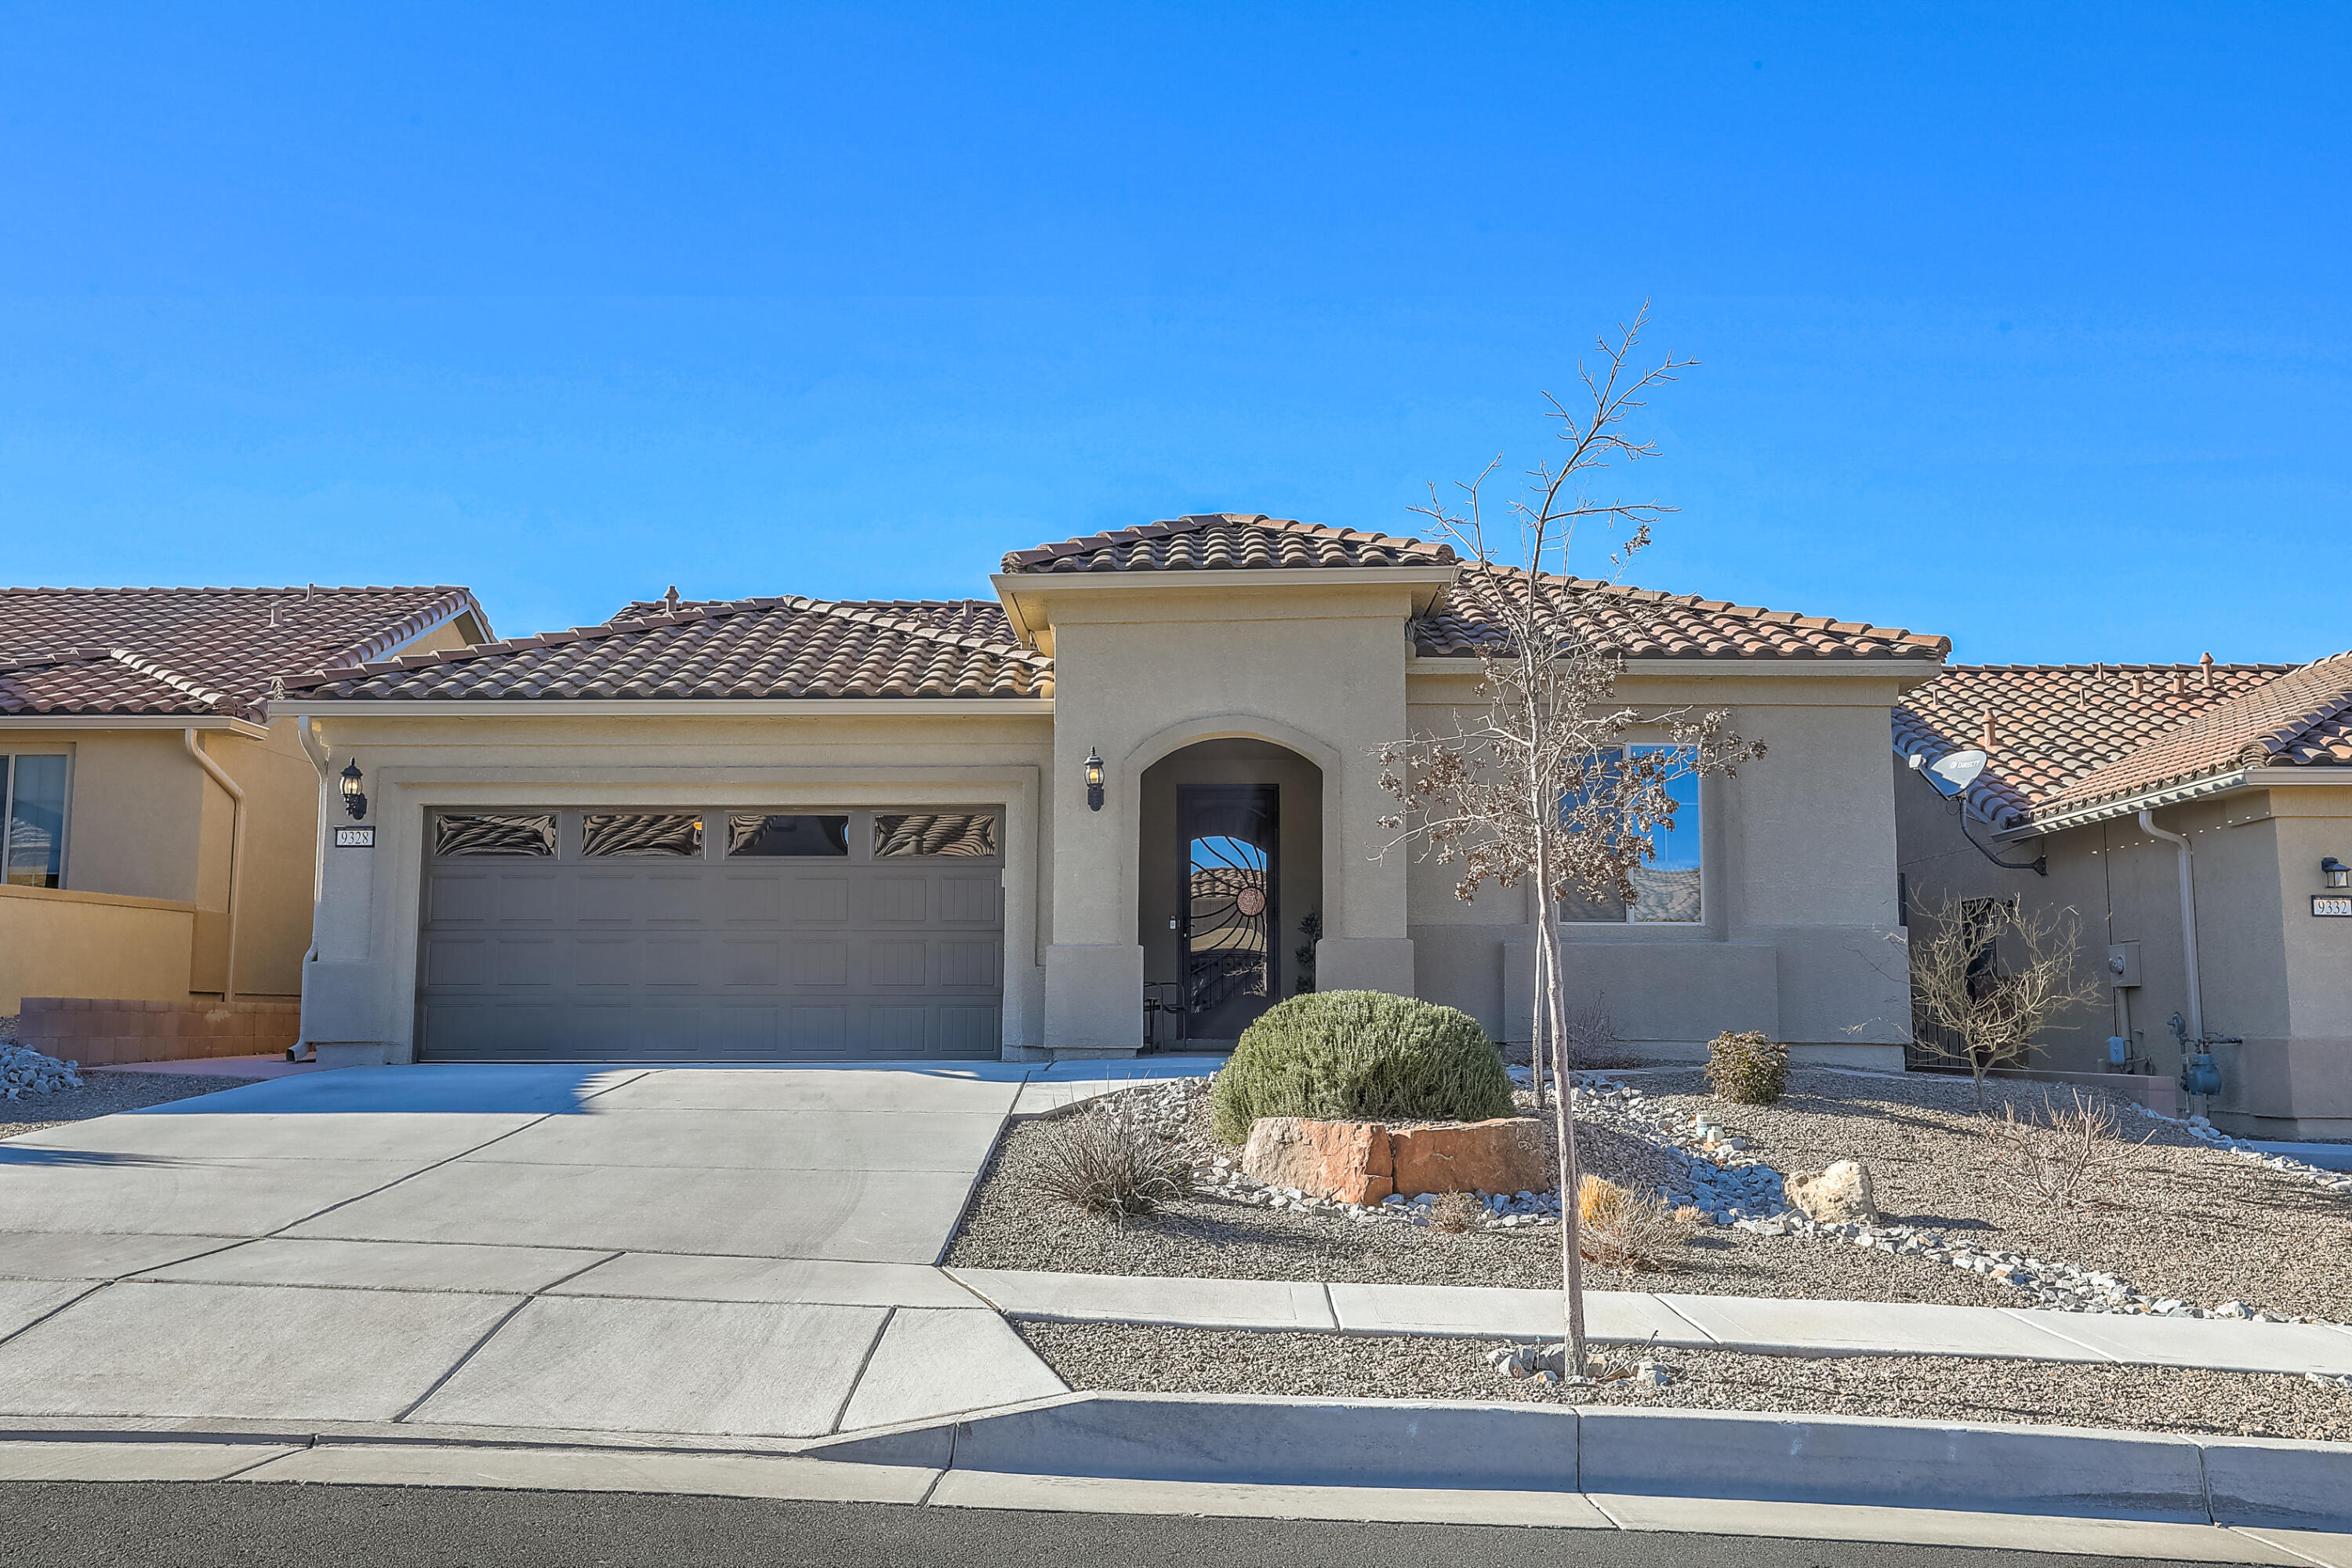 This Immaculate home in the Del Webb Active 55+ Adult Community at Mirehaven is like buying new construction but you get all the pluses with a fully landscaped yard and window treatments galore. This is the very popular Preserve Home with approx. 2048 SF, 2BR's, 2 BA's, Office/Den, Large Gathering and Dining Area, Over-sized 2 Car Garage w/4 Ft Extension and windows in the garage door w/ overhead storage units in garage and a custom security door inside garage door. Over $100,000 Plus ++ in upgrades and improvements will Wow you when you come in to see what this house has. You will love the open concept which has: Beautiful front security door (glass and screen option), trey ceilings in entry and office, French doors on office, Chef Lux Kitchen package that includes: Stainless Steel